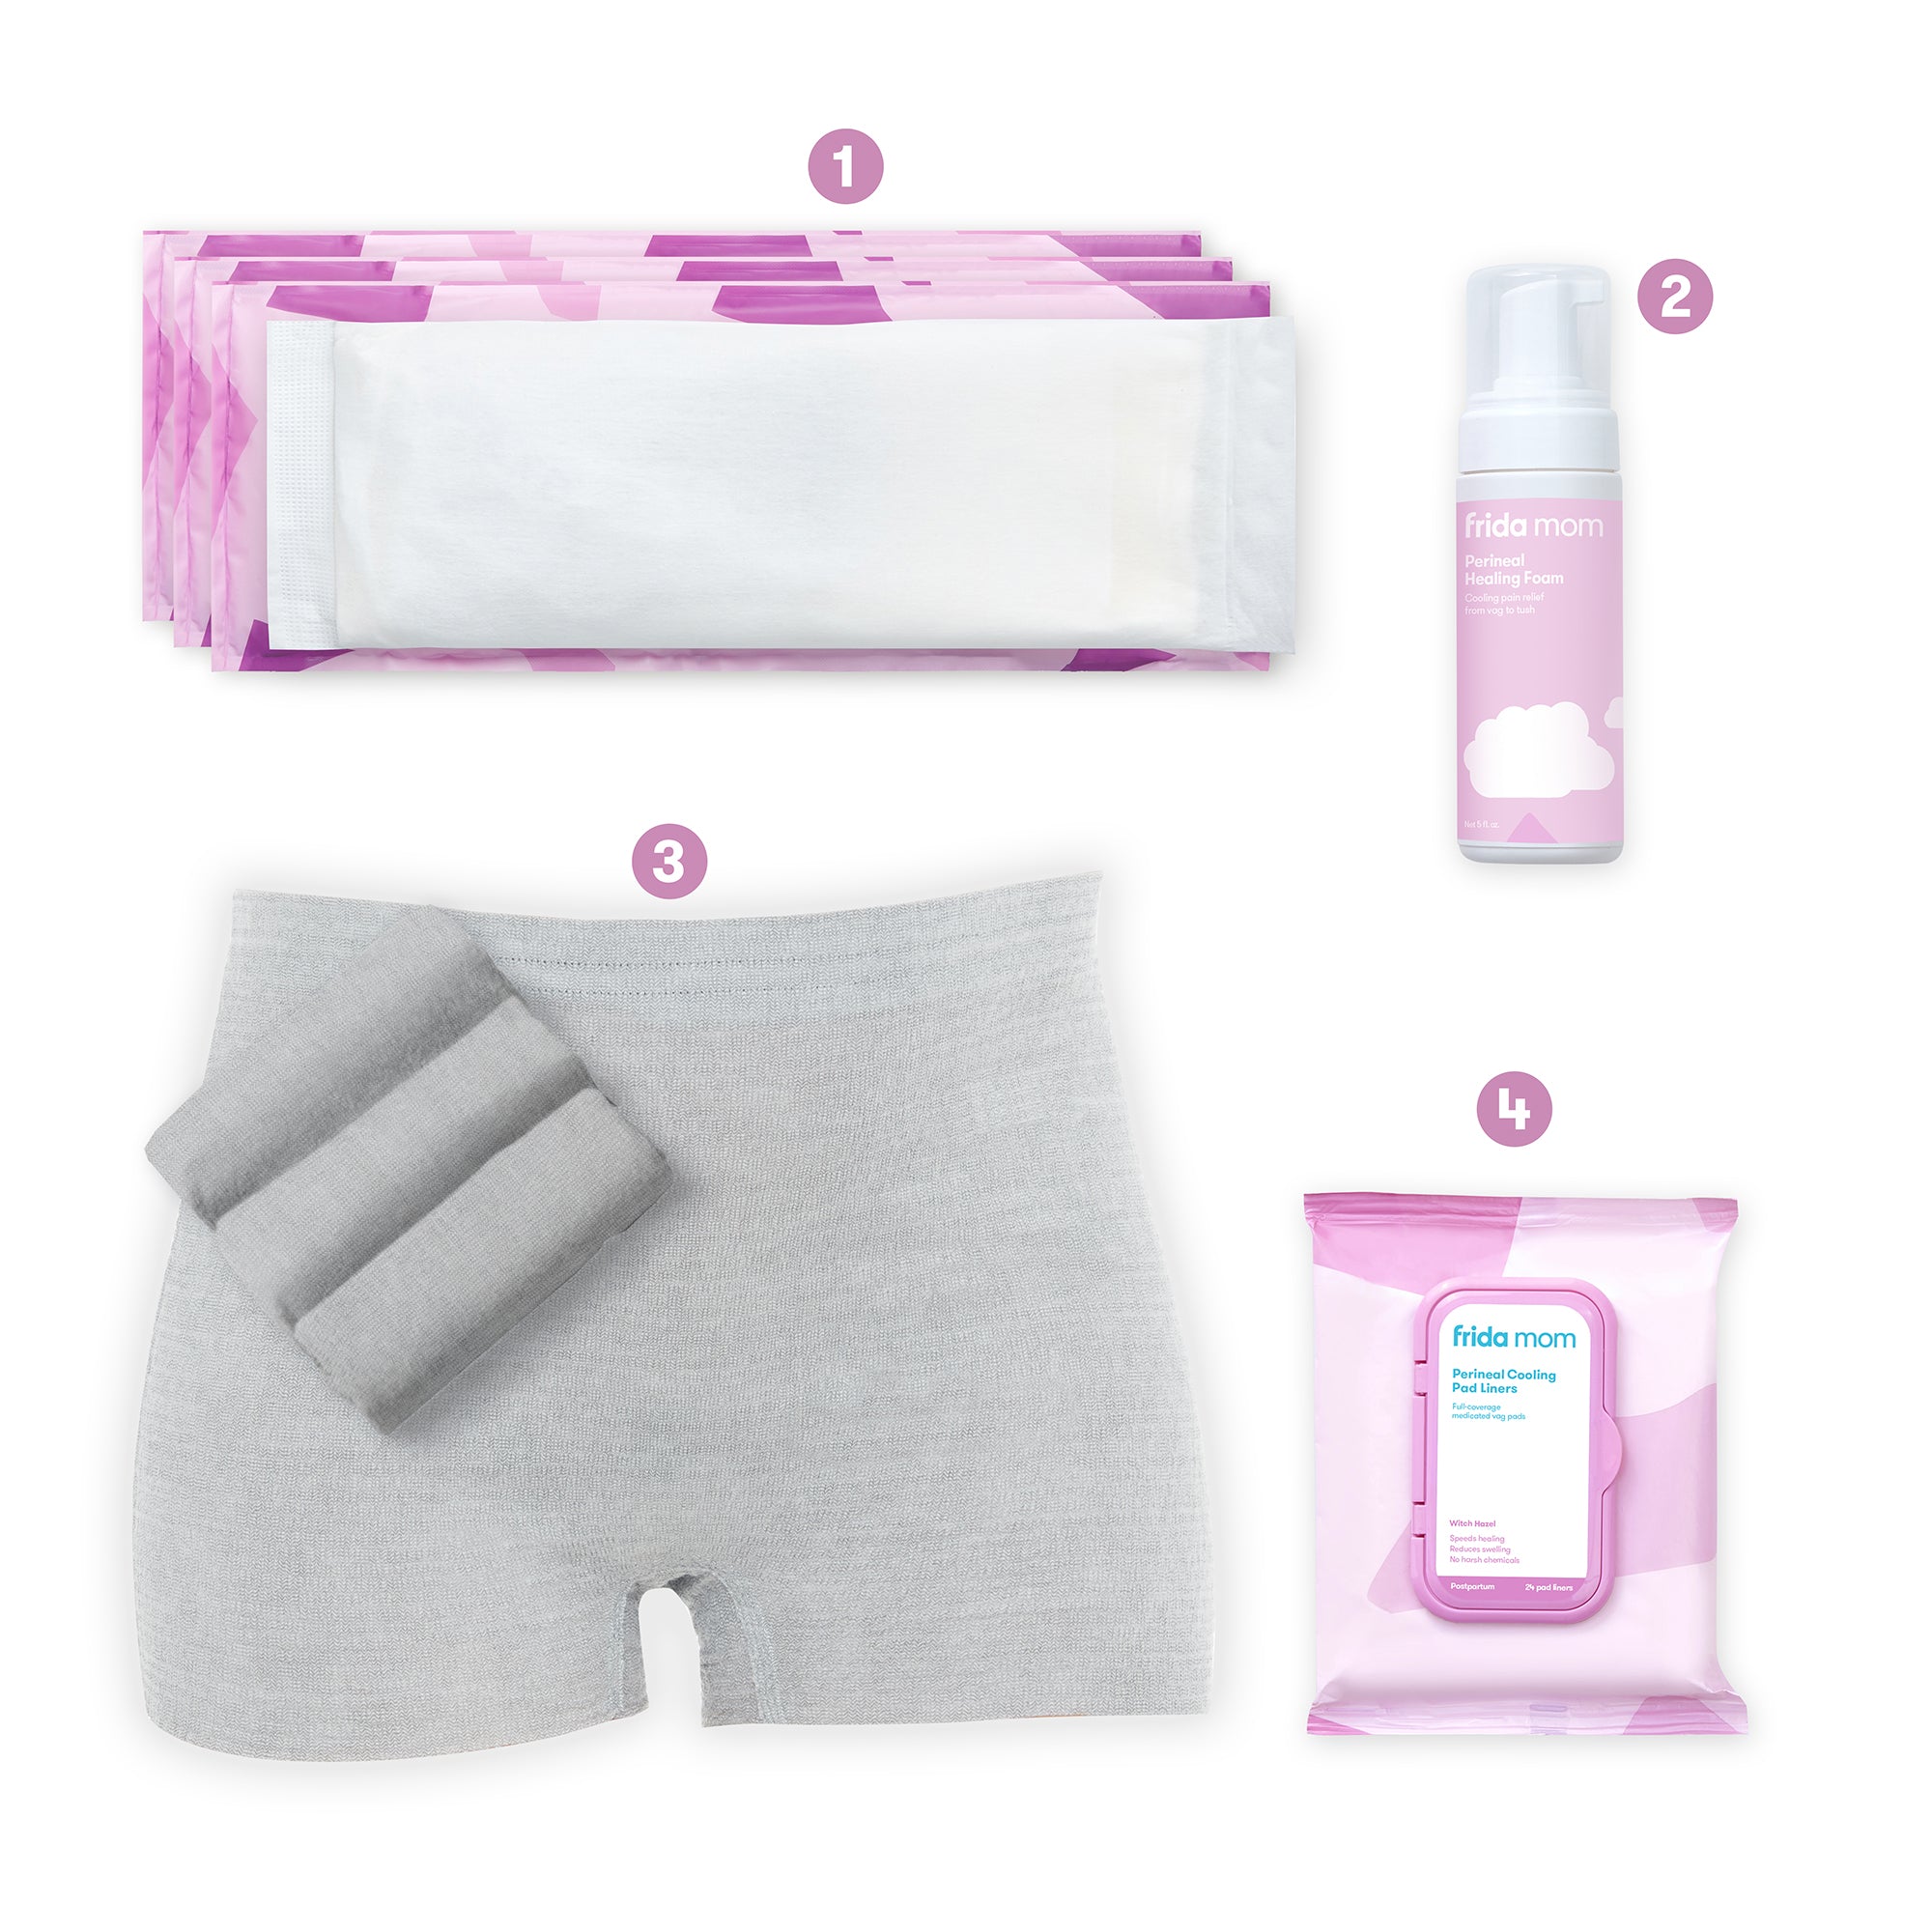 Grownsy Postpartum Mom & Baby Essential Kits, Postpartum Recovery Kit for Labor &Delivery with Hospital Essentials for Women After Birth with Peri